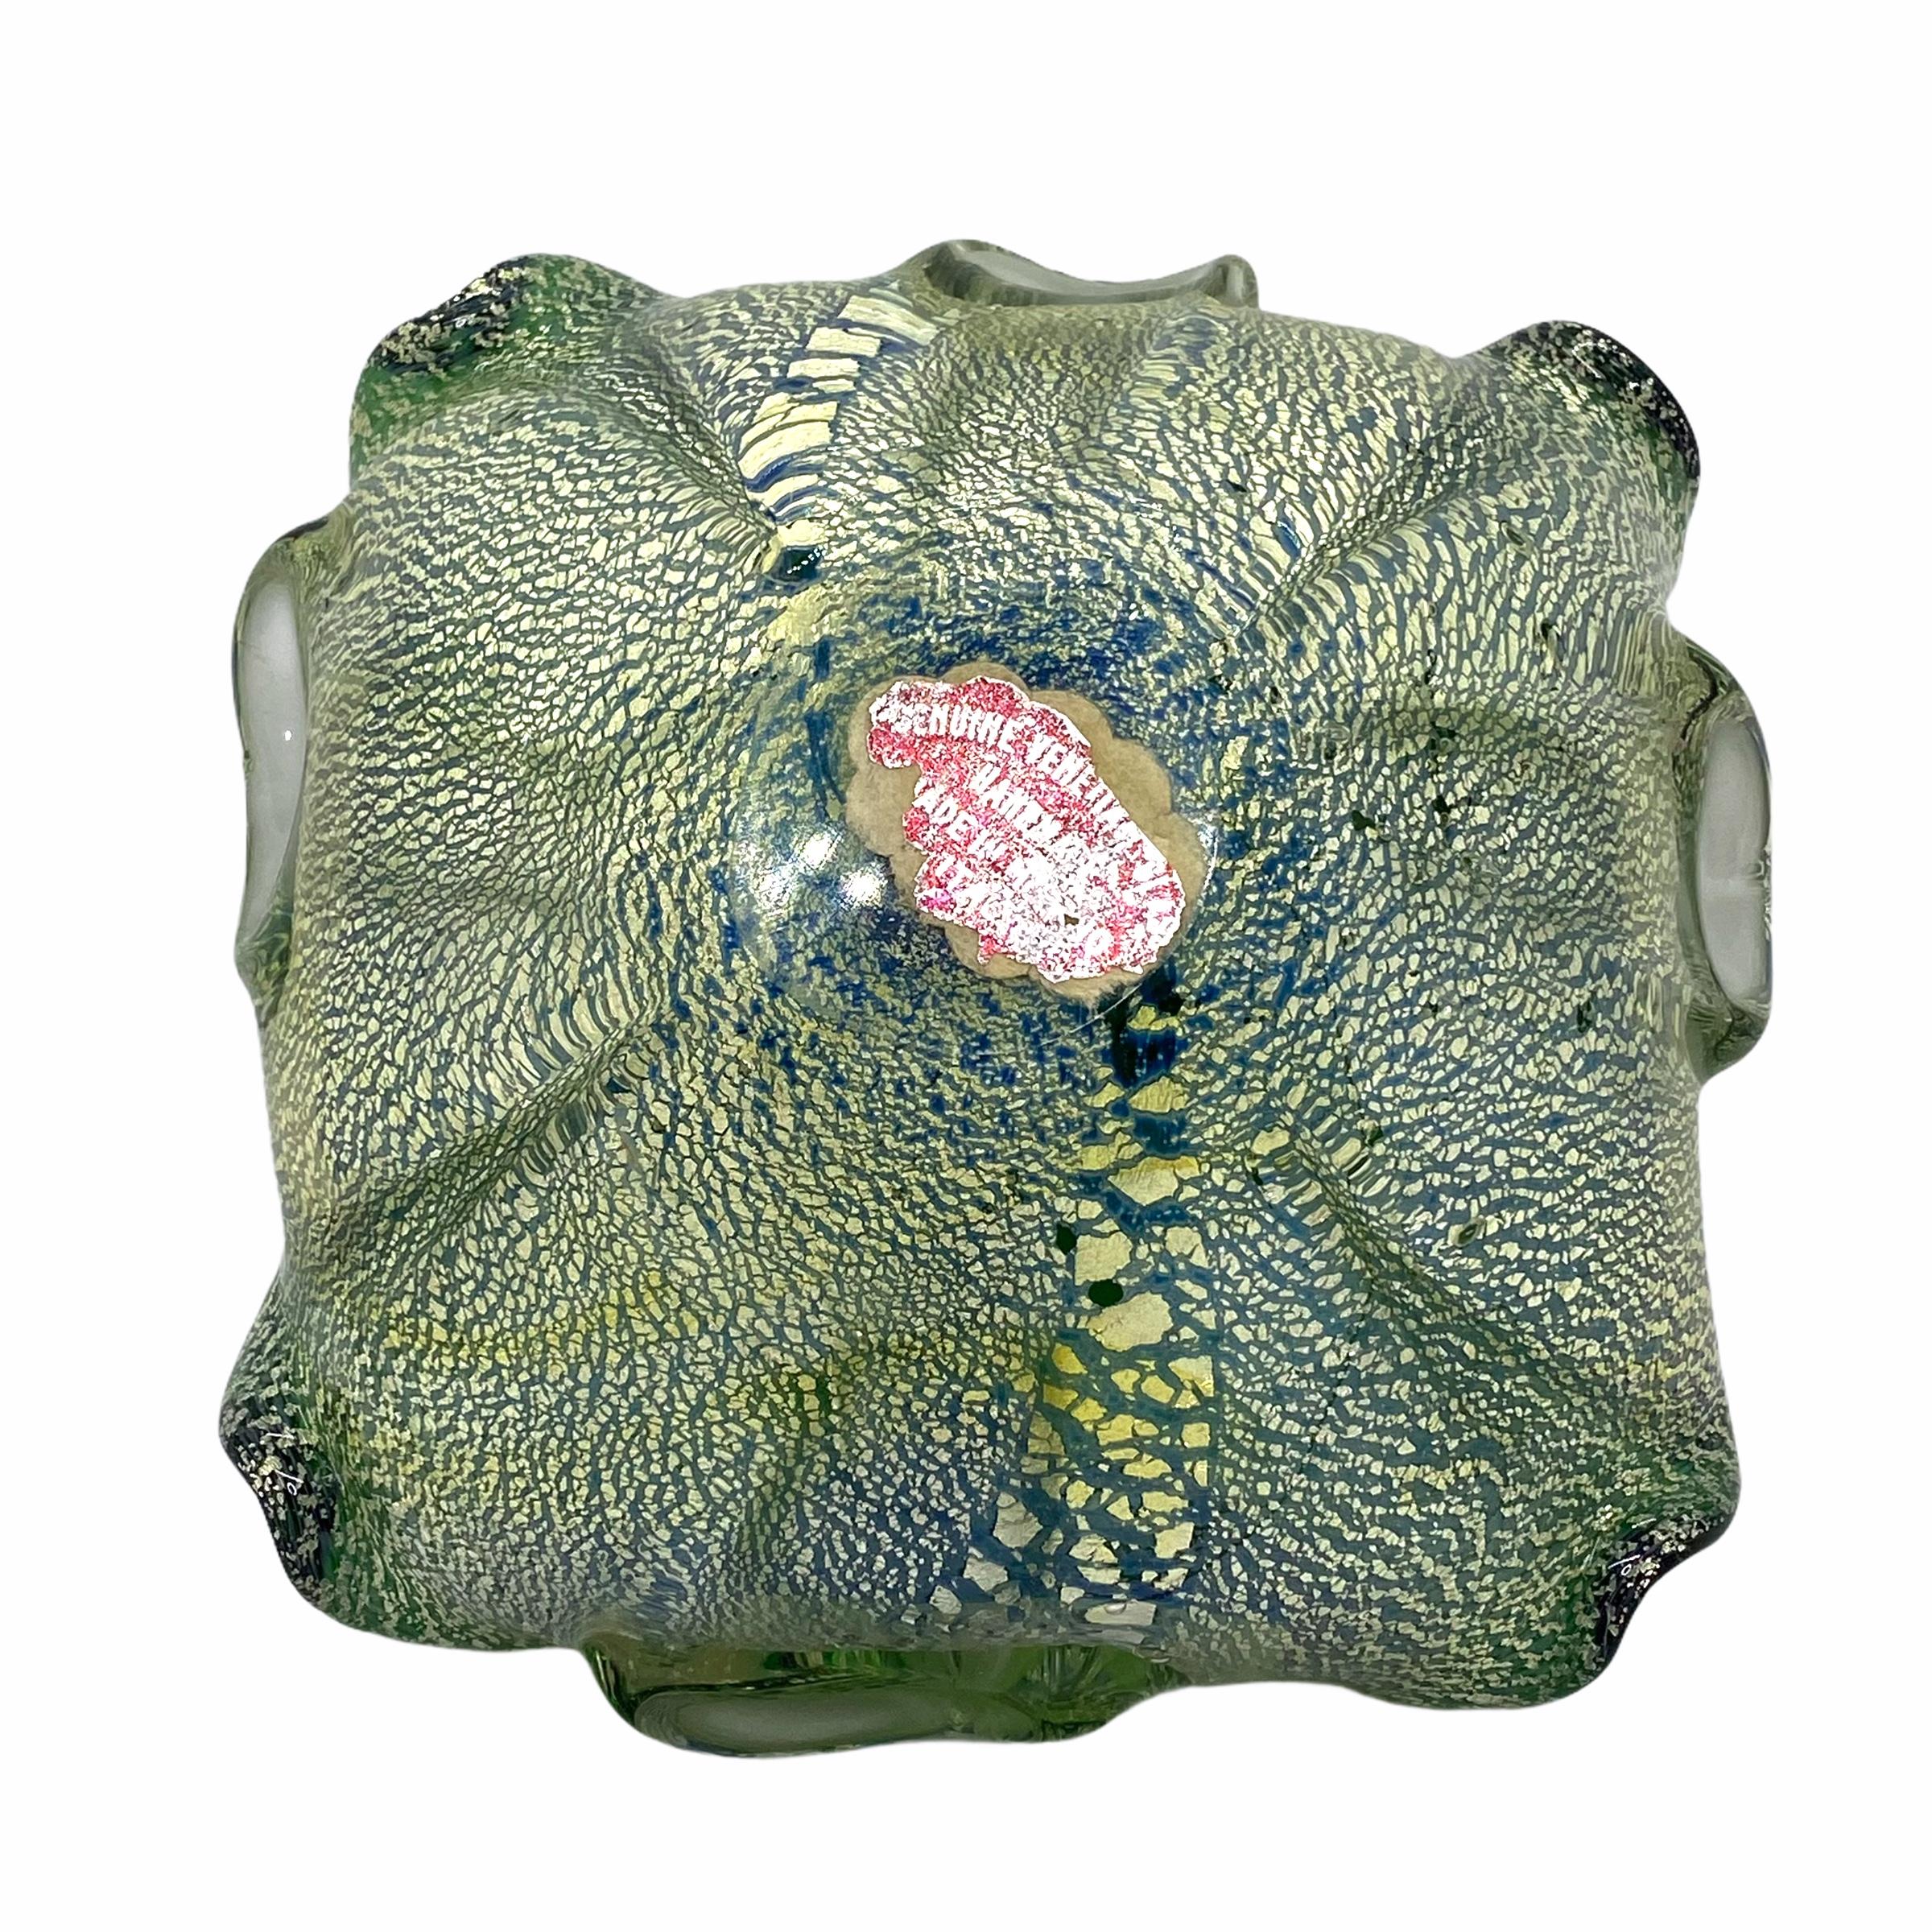 Mid-20th Century Petite Murano Art Glass Bowl or Catchall by Barovier Toso, 1950s, Venice, Italy For Sale